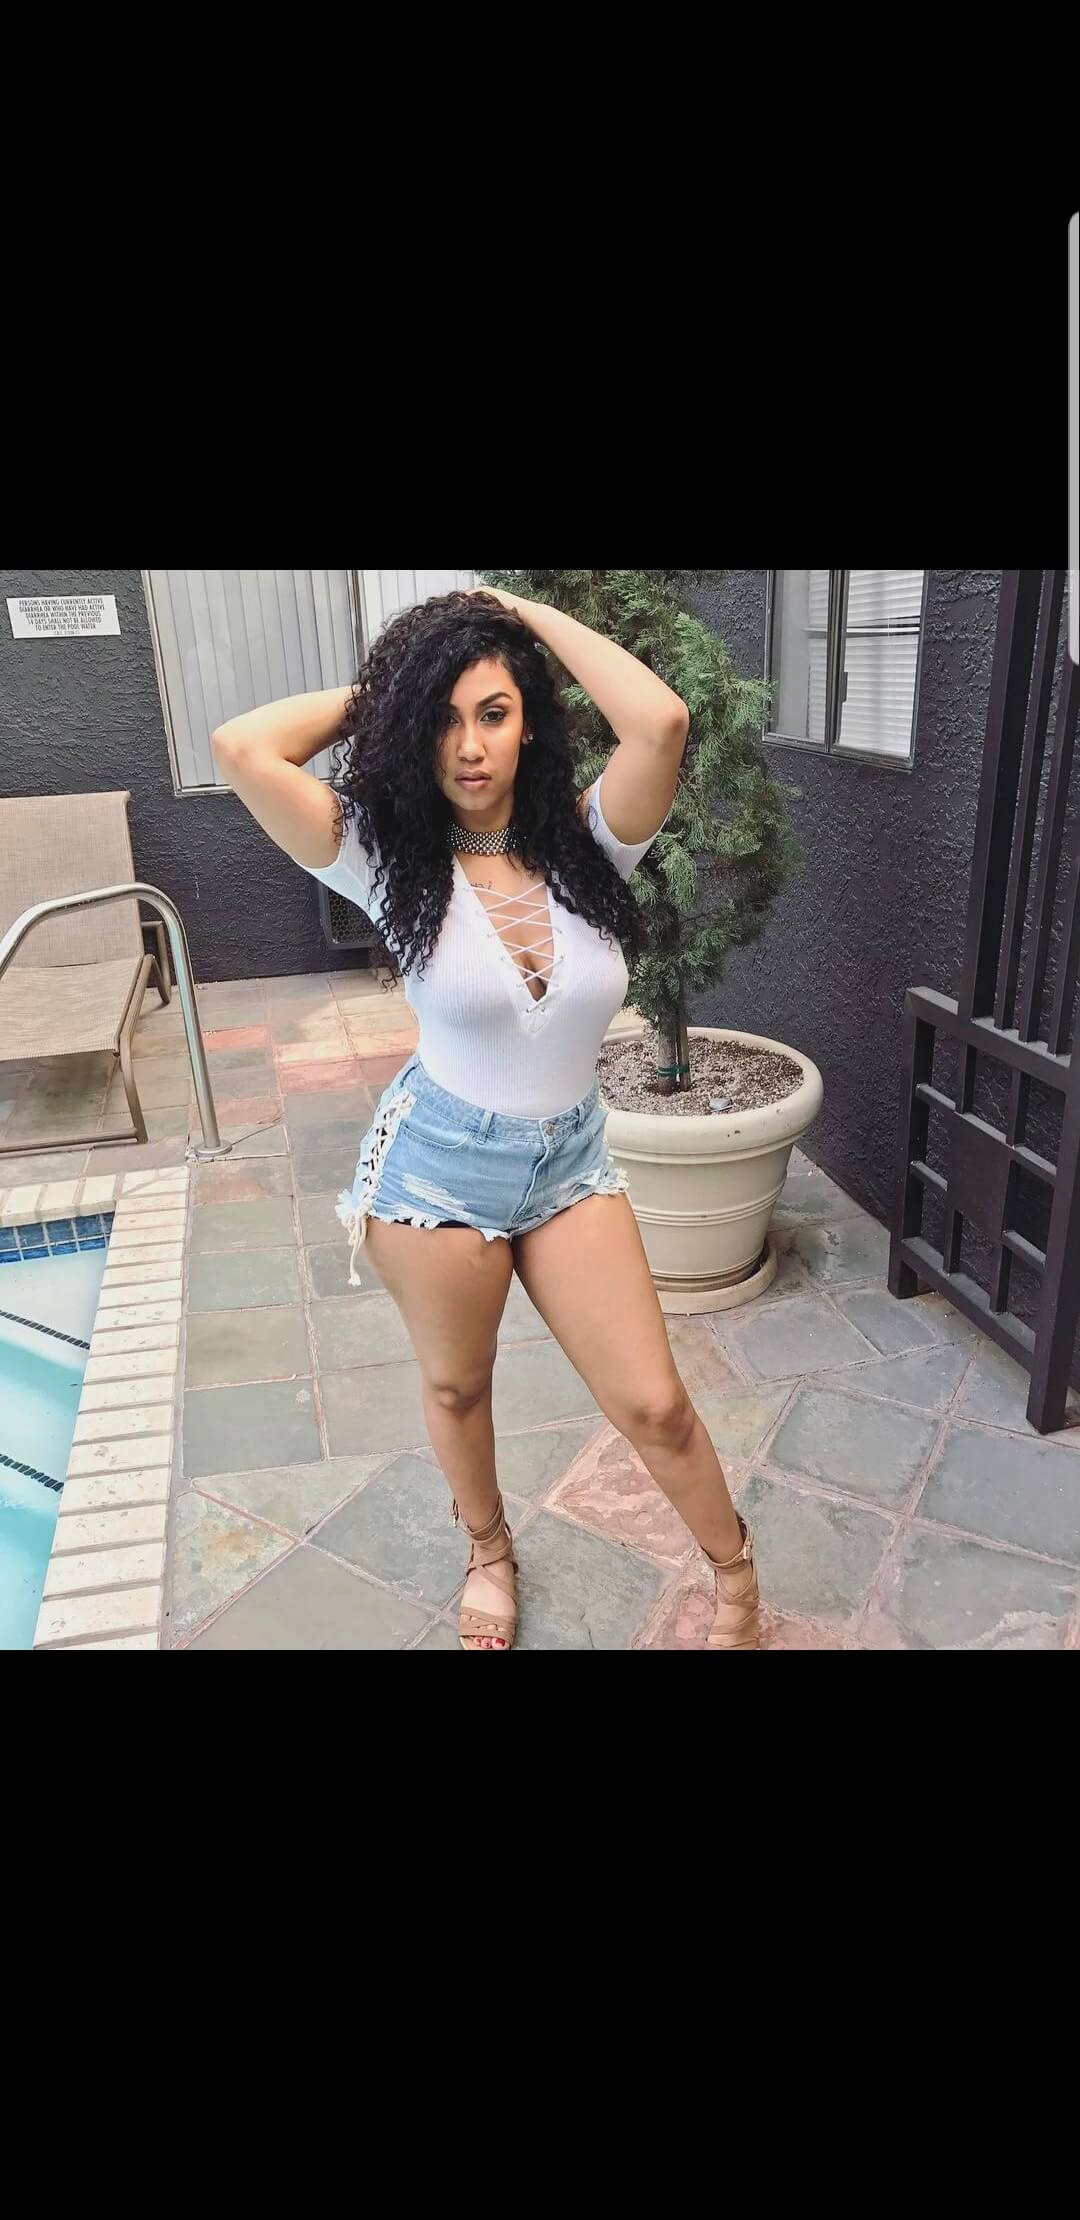 49 Hot Pictures Of Queen Naija Which Are Going To Make You Want Her Badly | Best Of Comic Books